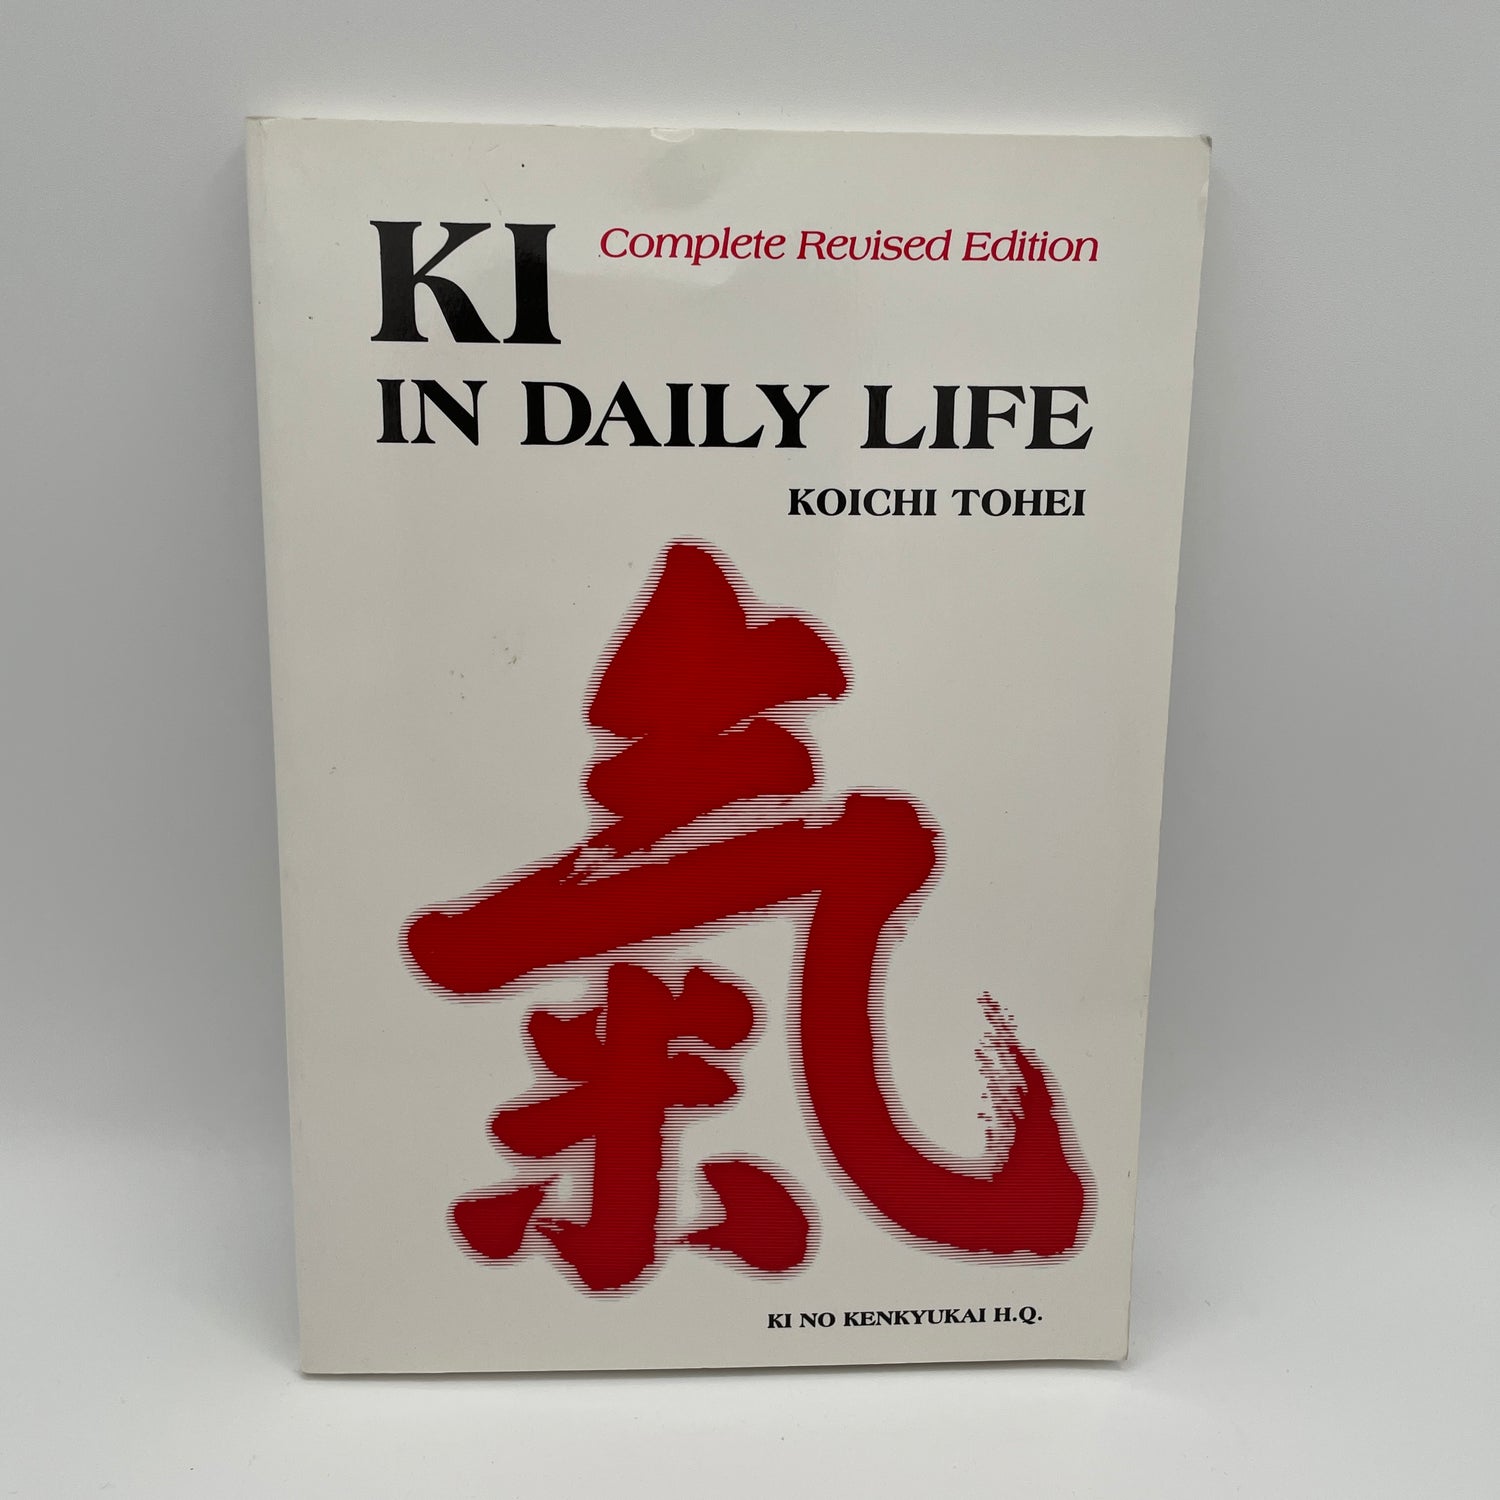 Ki in Daily Life Revised Edition Book by Koichi Tohei (Preowned)